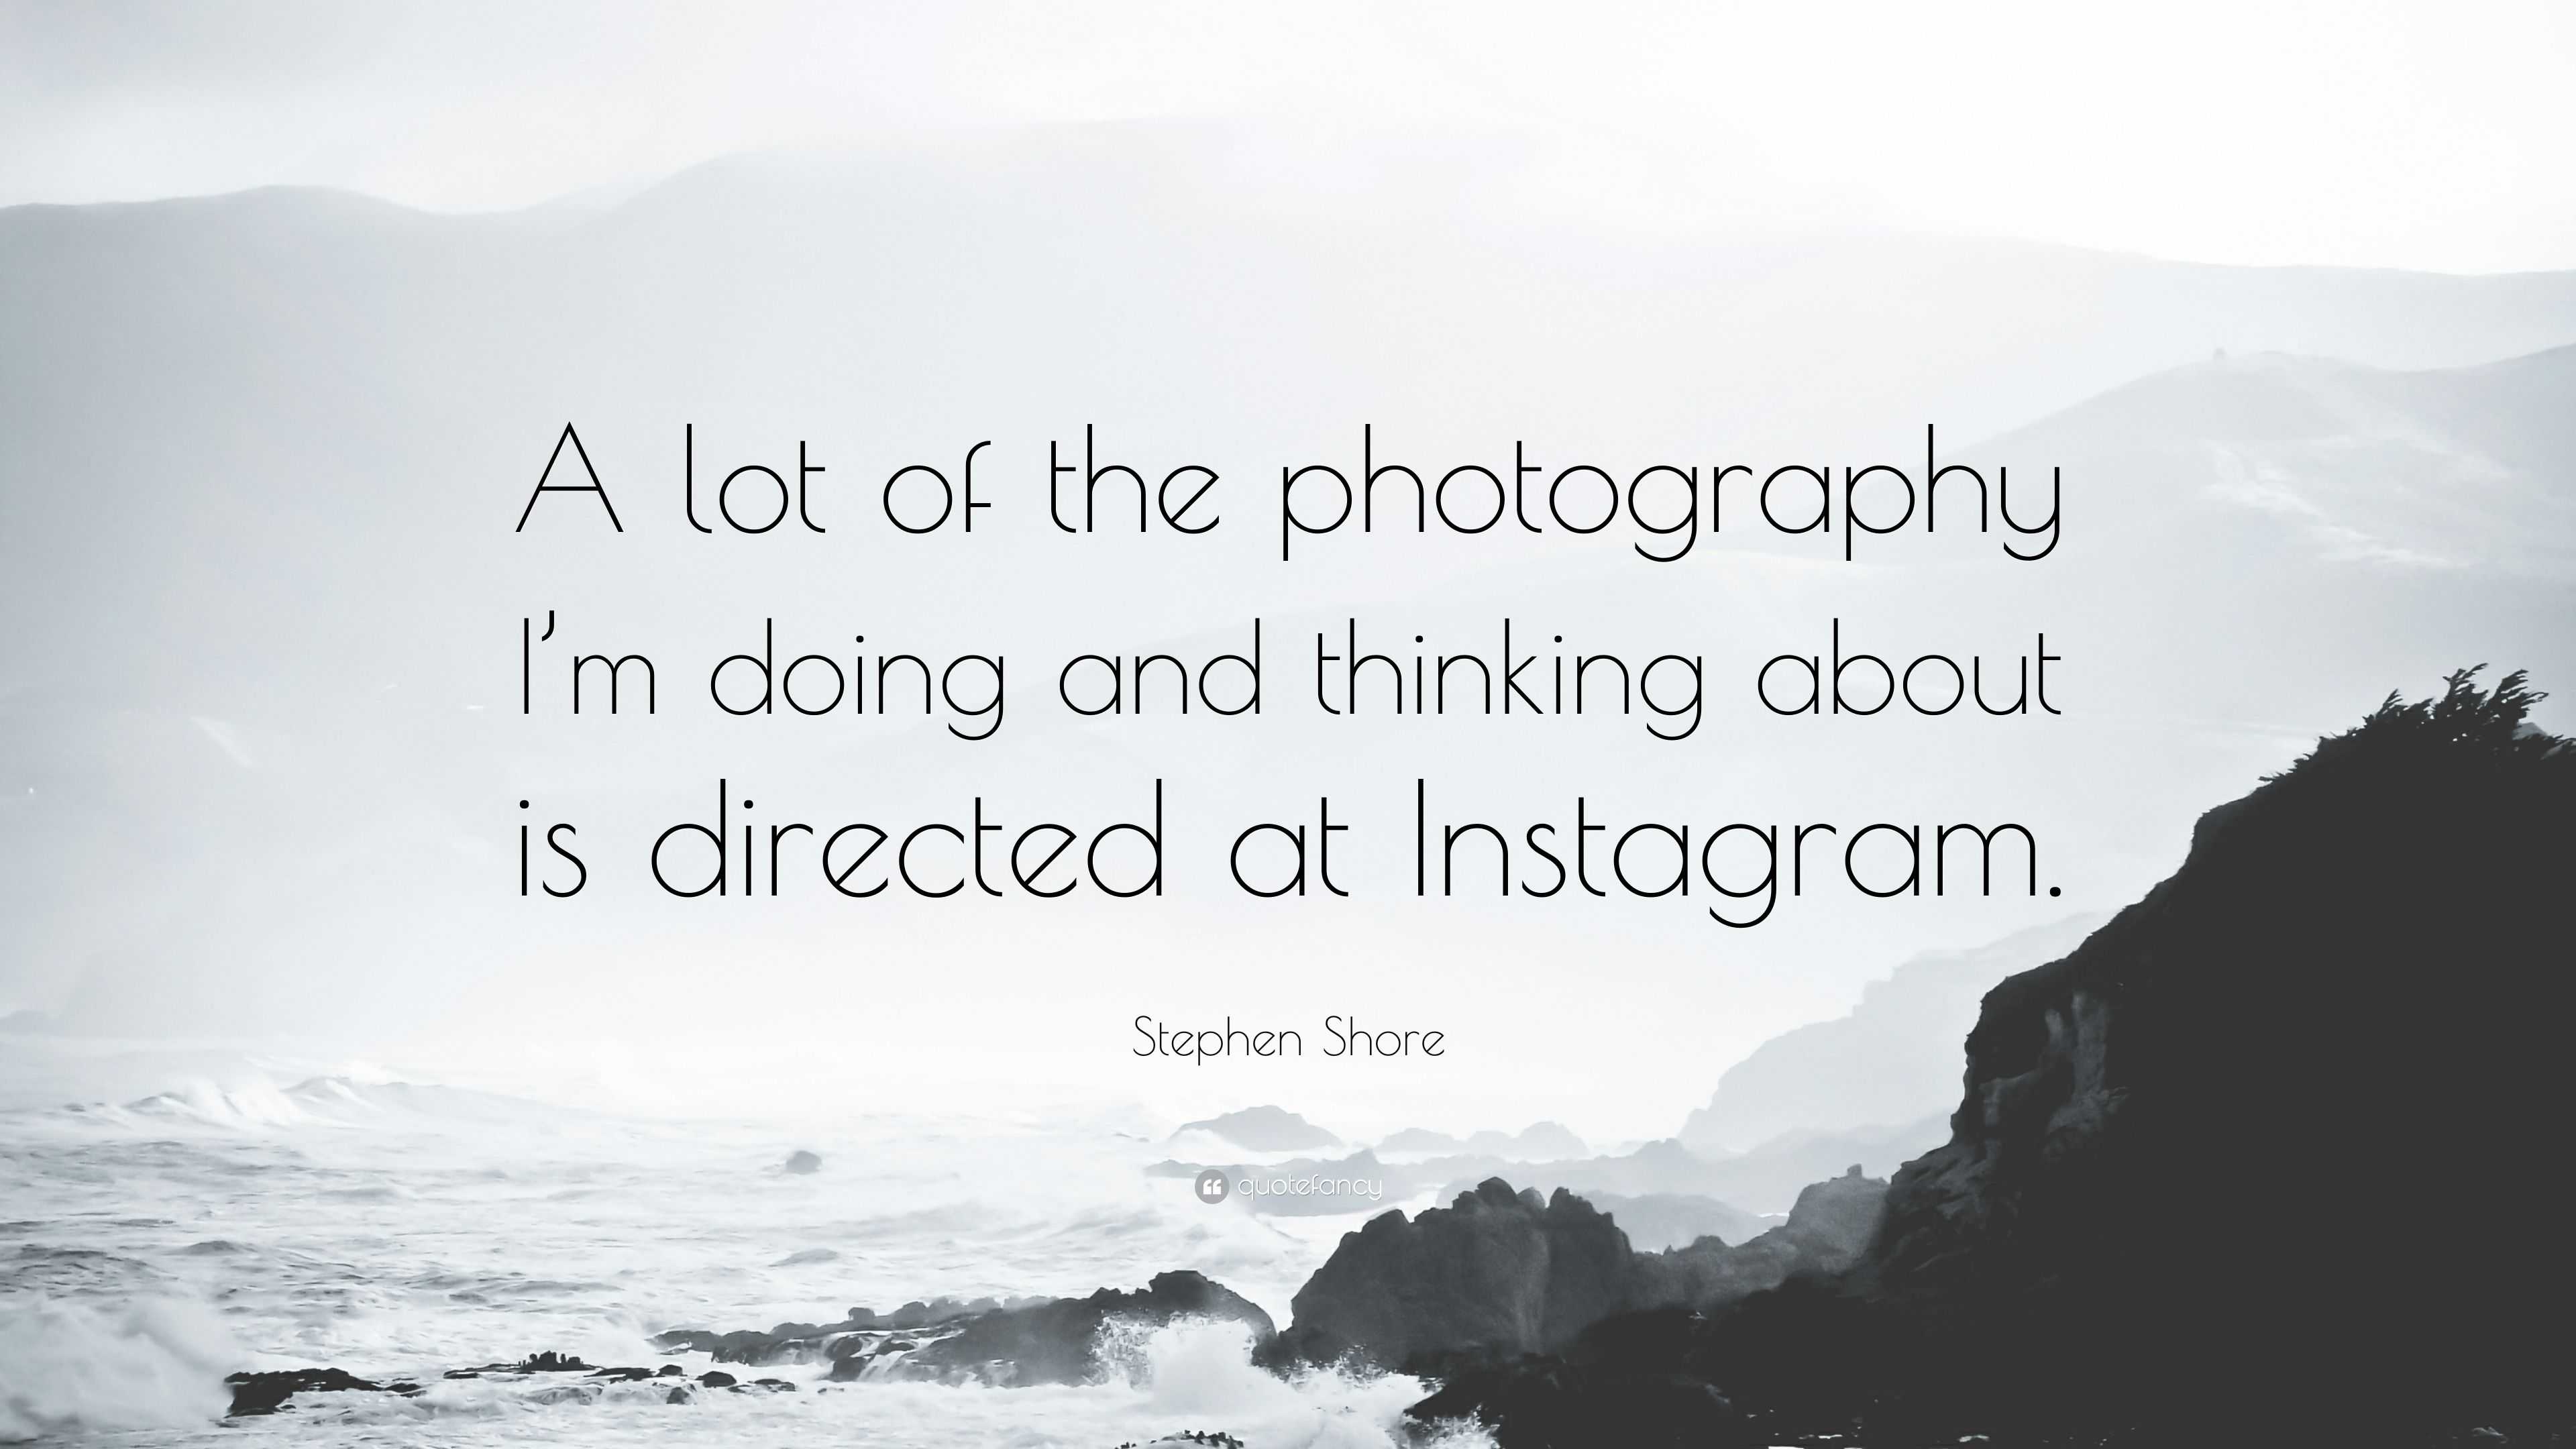 Stephen Shore Quote: “A lot of the photography I’m doing and thinking ...